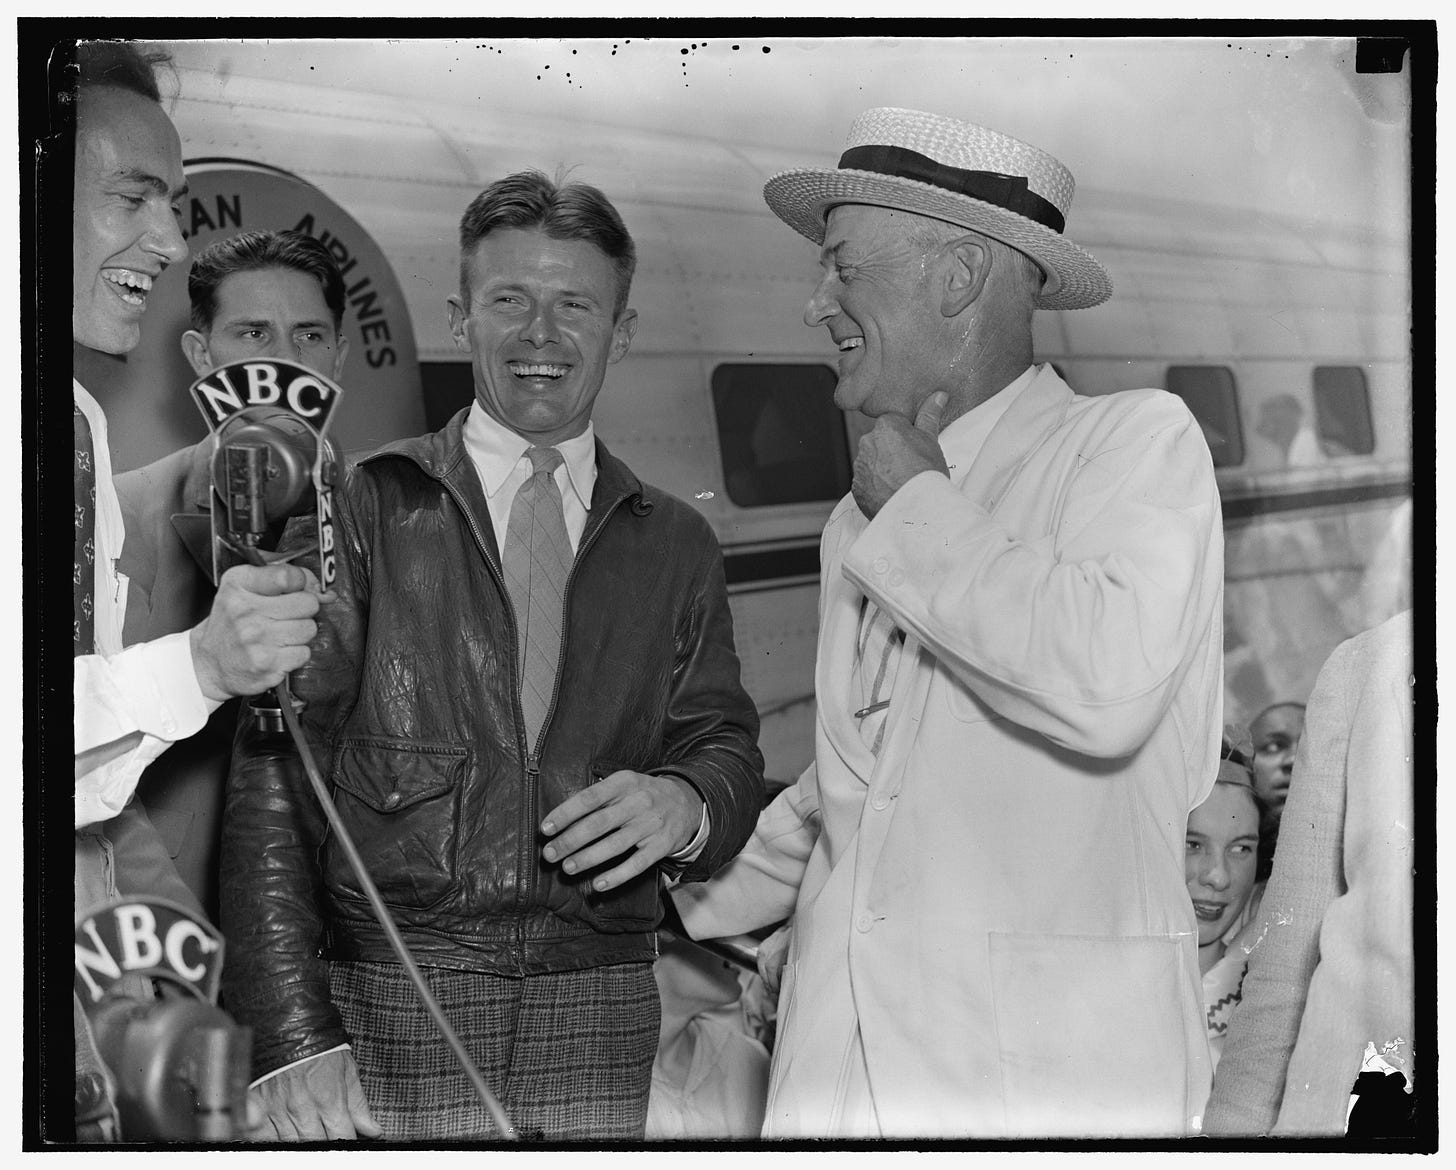 Douglas Corrigan stands before reporters at   an airport. An NBC microphone is visible in the foreground, and an American Airlines Douglas DC-2 is in the background.  Corrigan and the two men standing next to him are laughing.